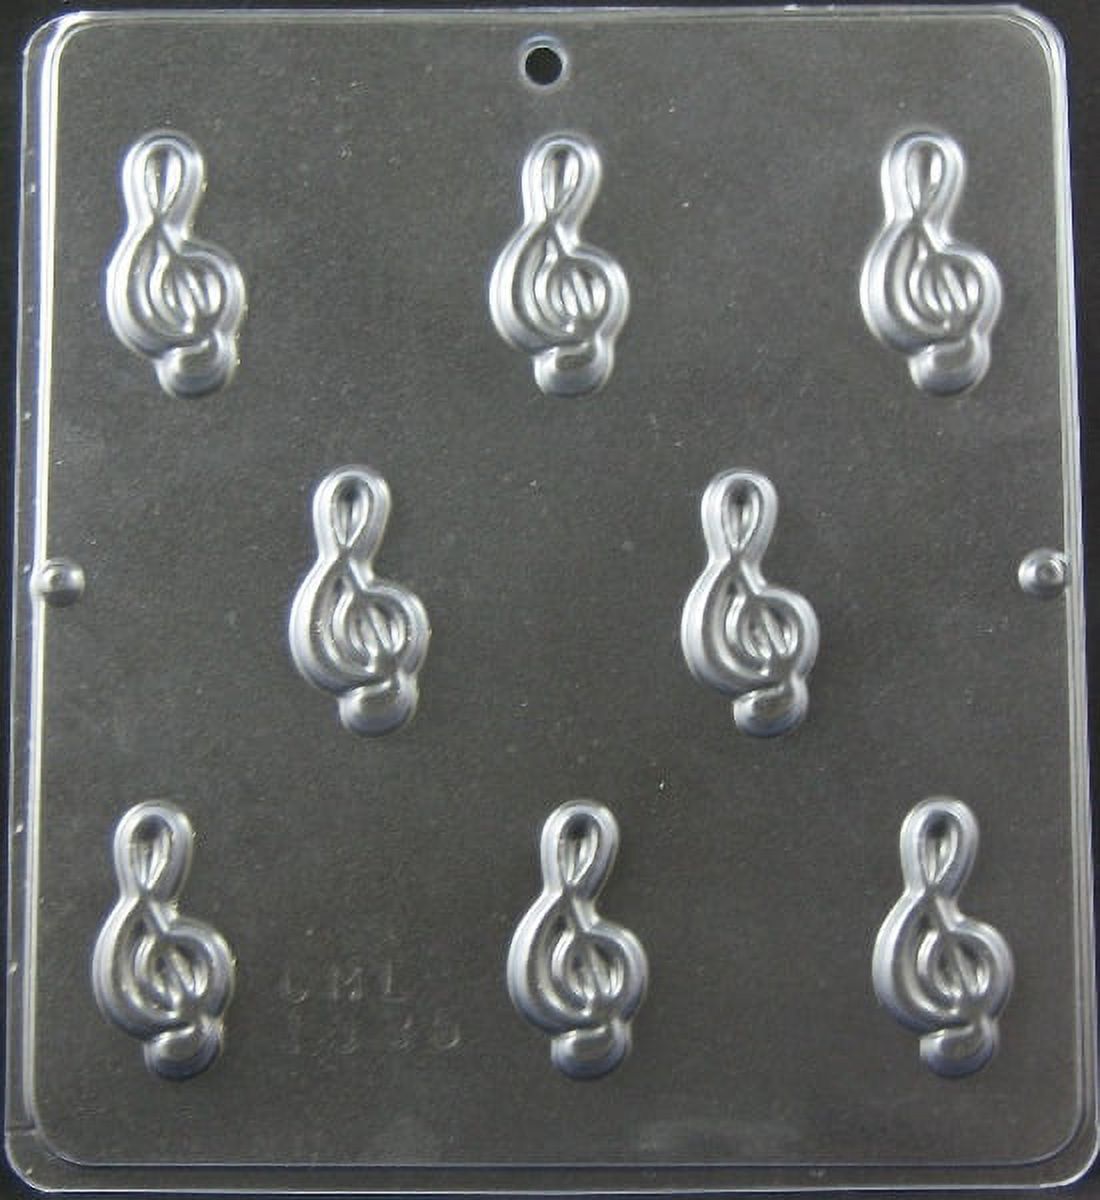 1335 G Clef Musical Note Bite Size Chocolate Candy Mold - image 1 of 1